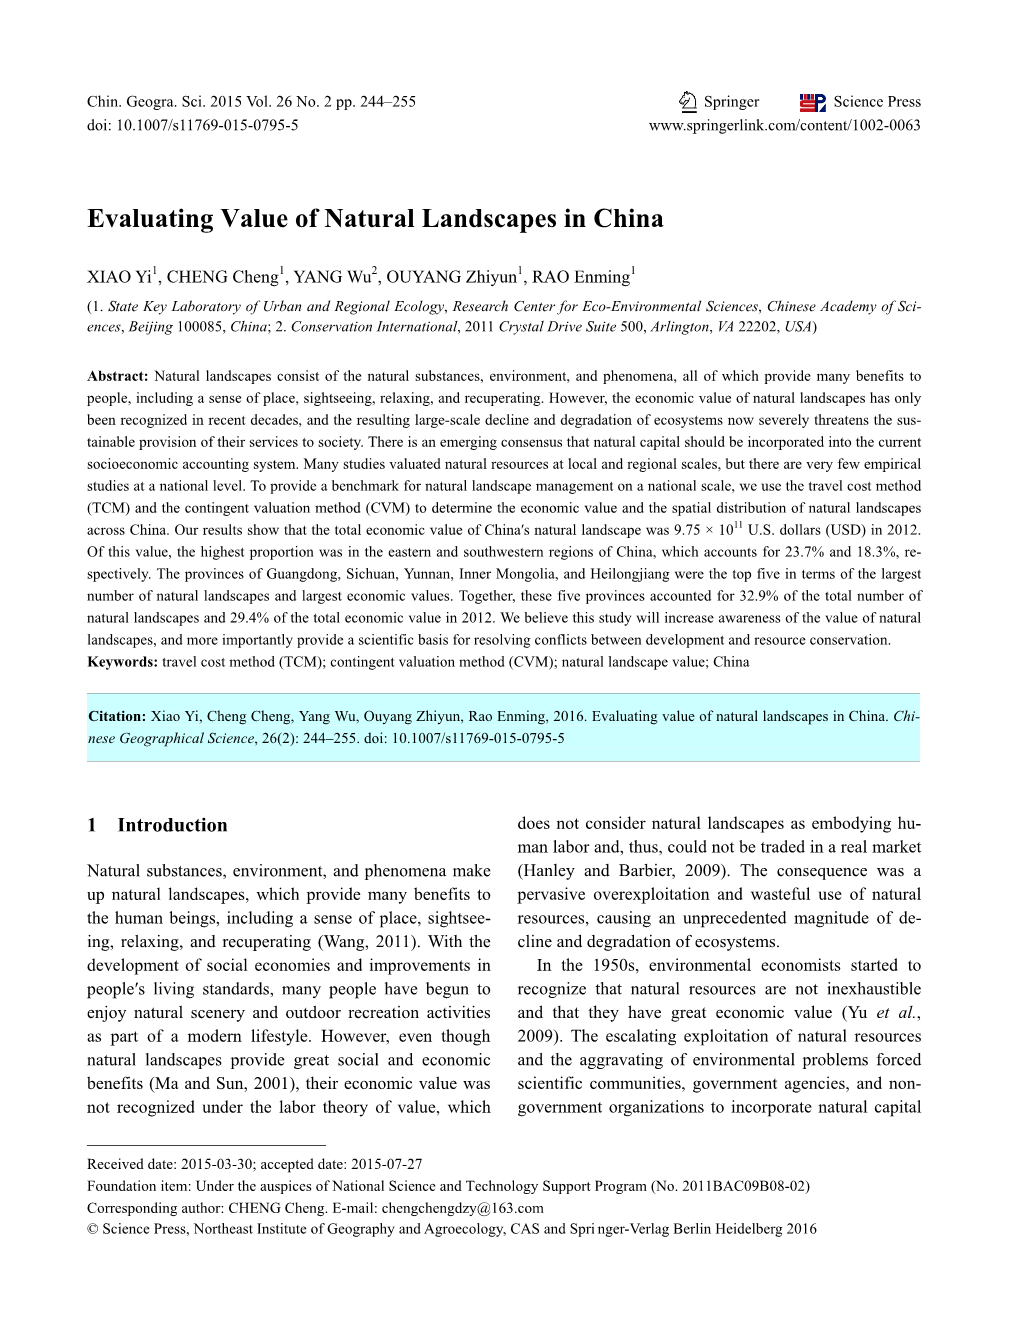 Evaluating Value of Natural Landscapes in China